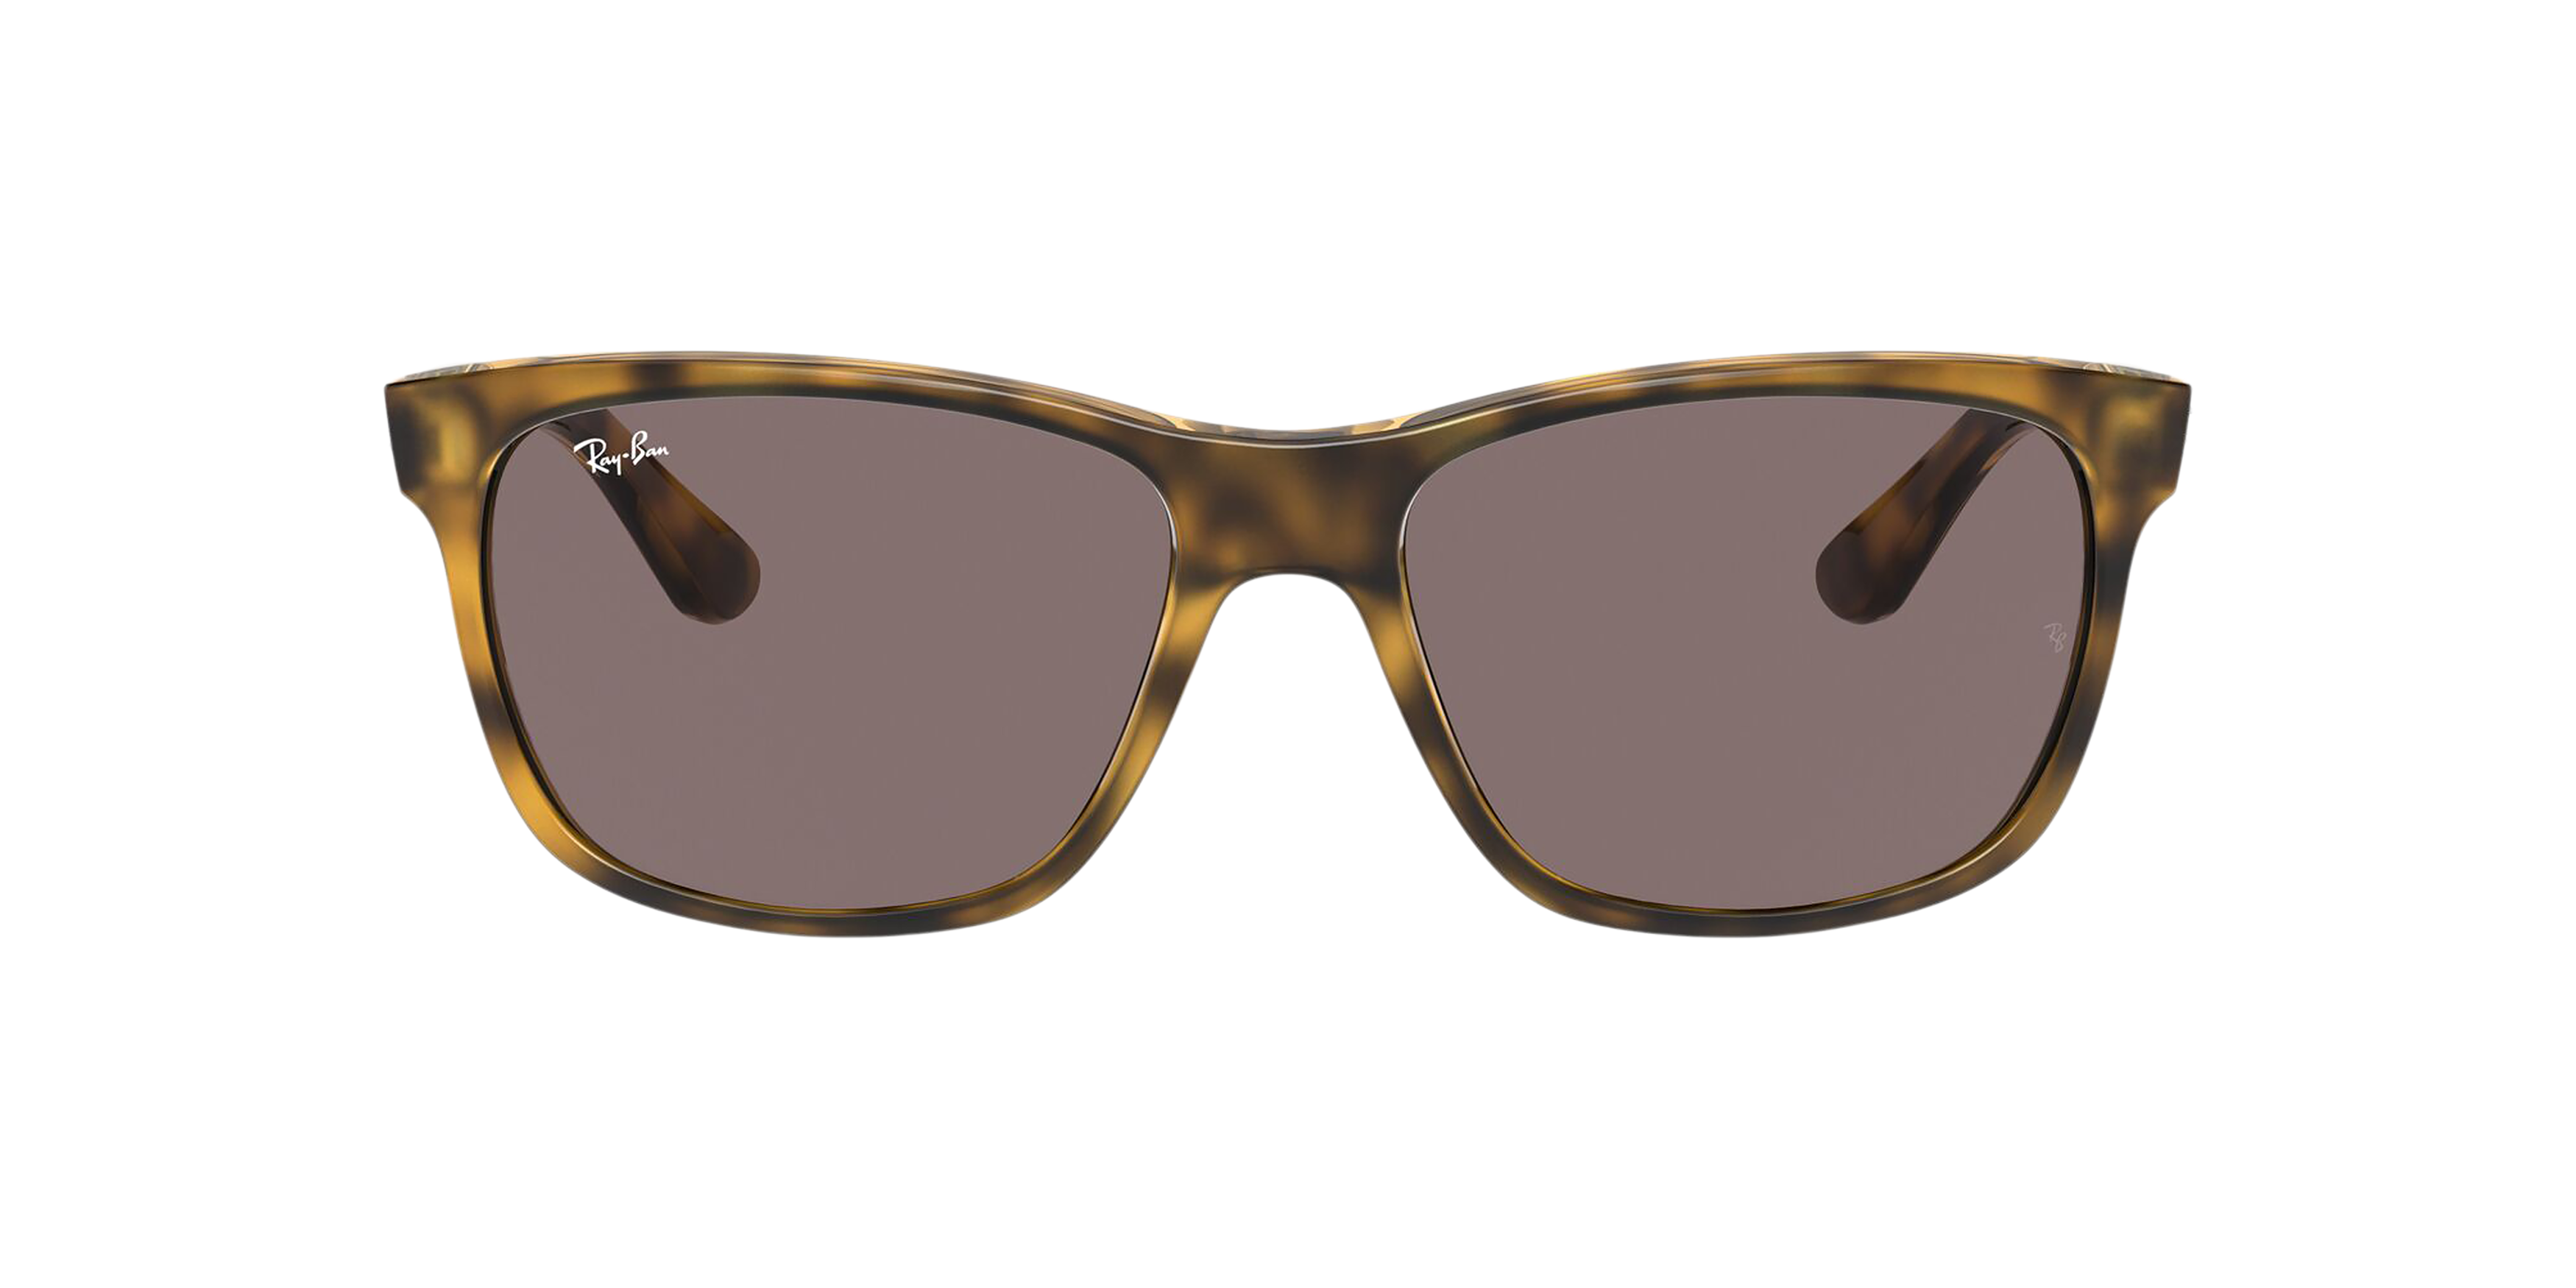 [products.image.front] Ray-Ban RB4181 710/7N